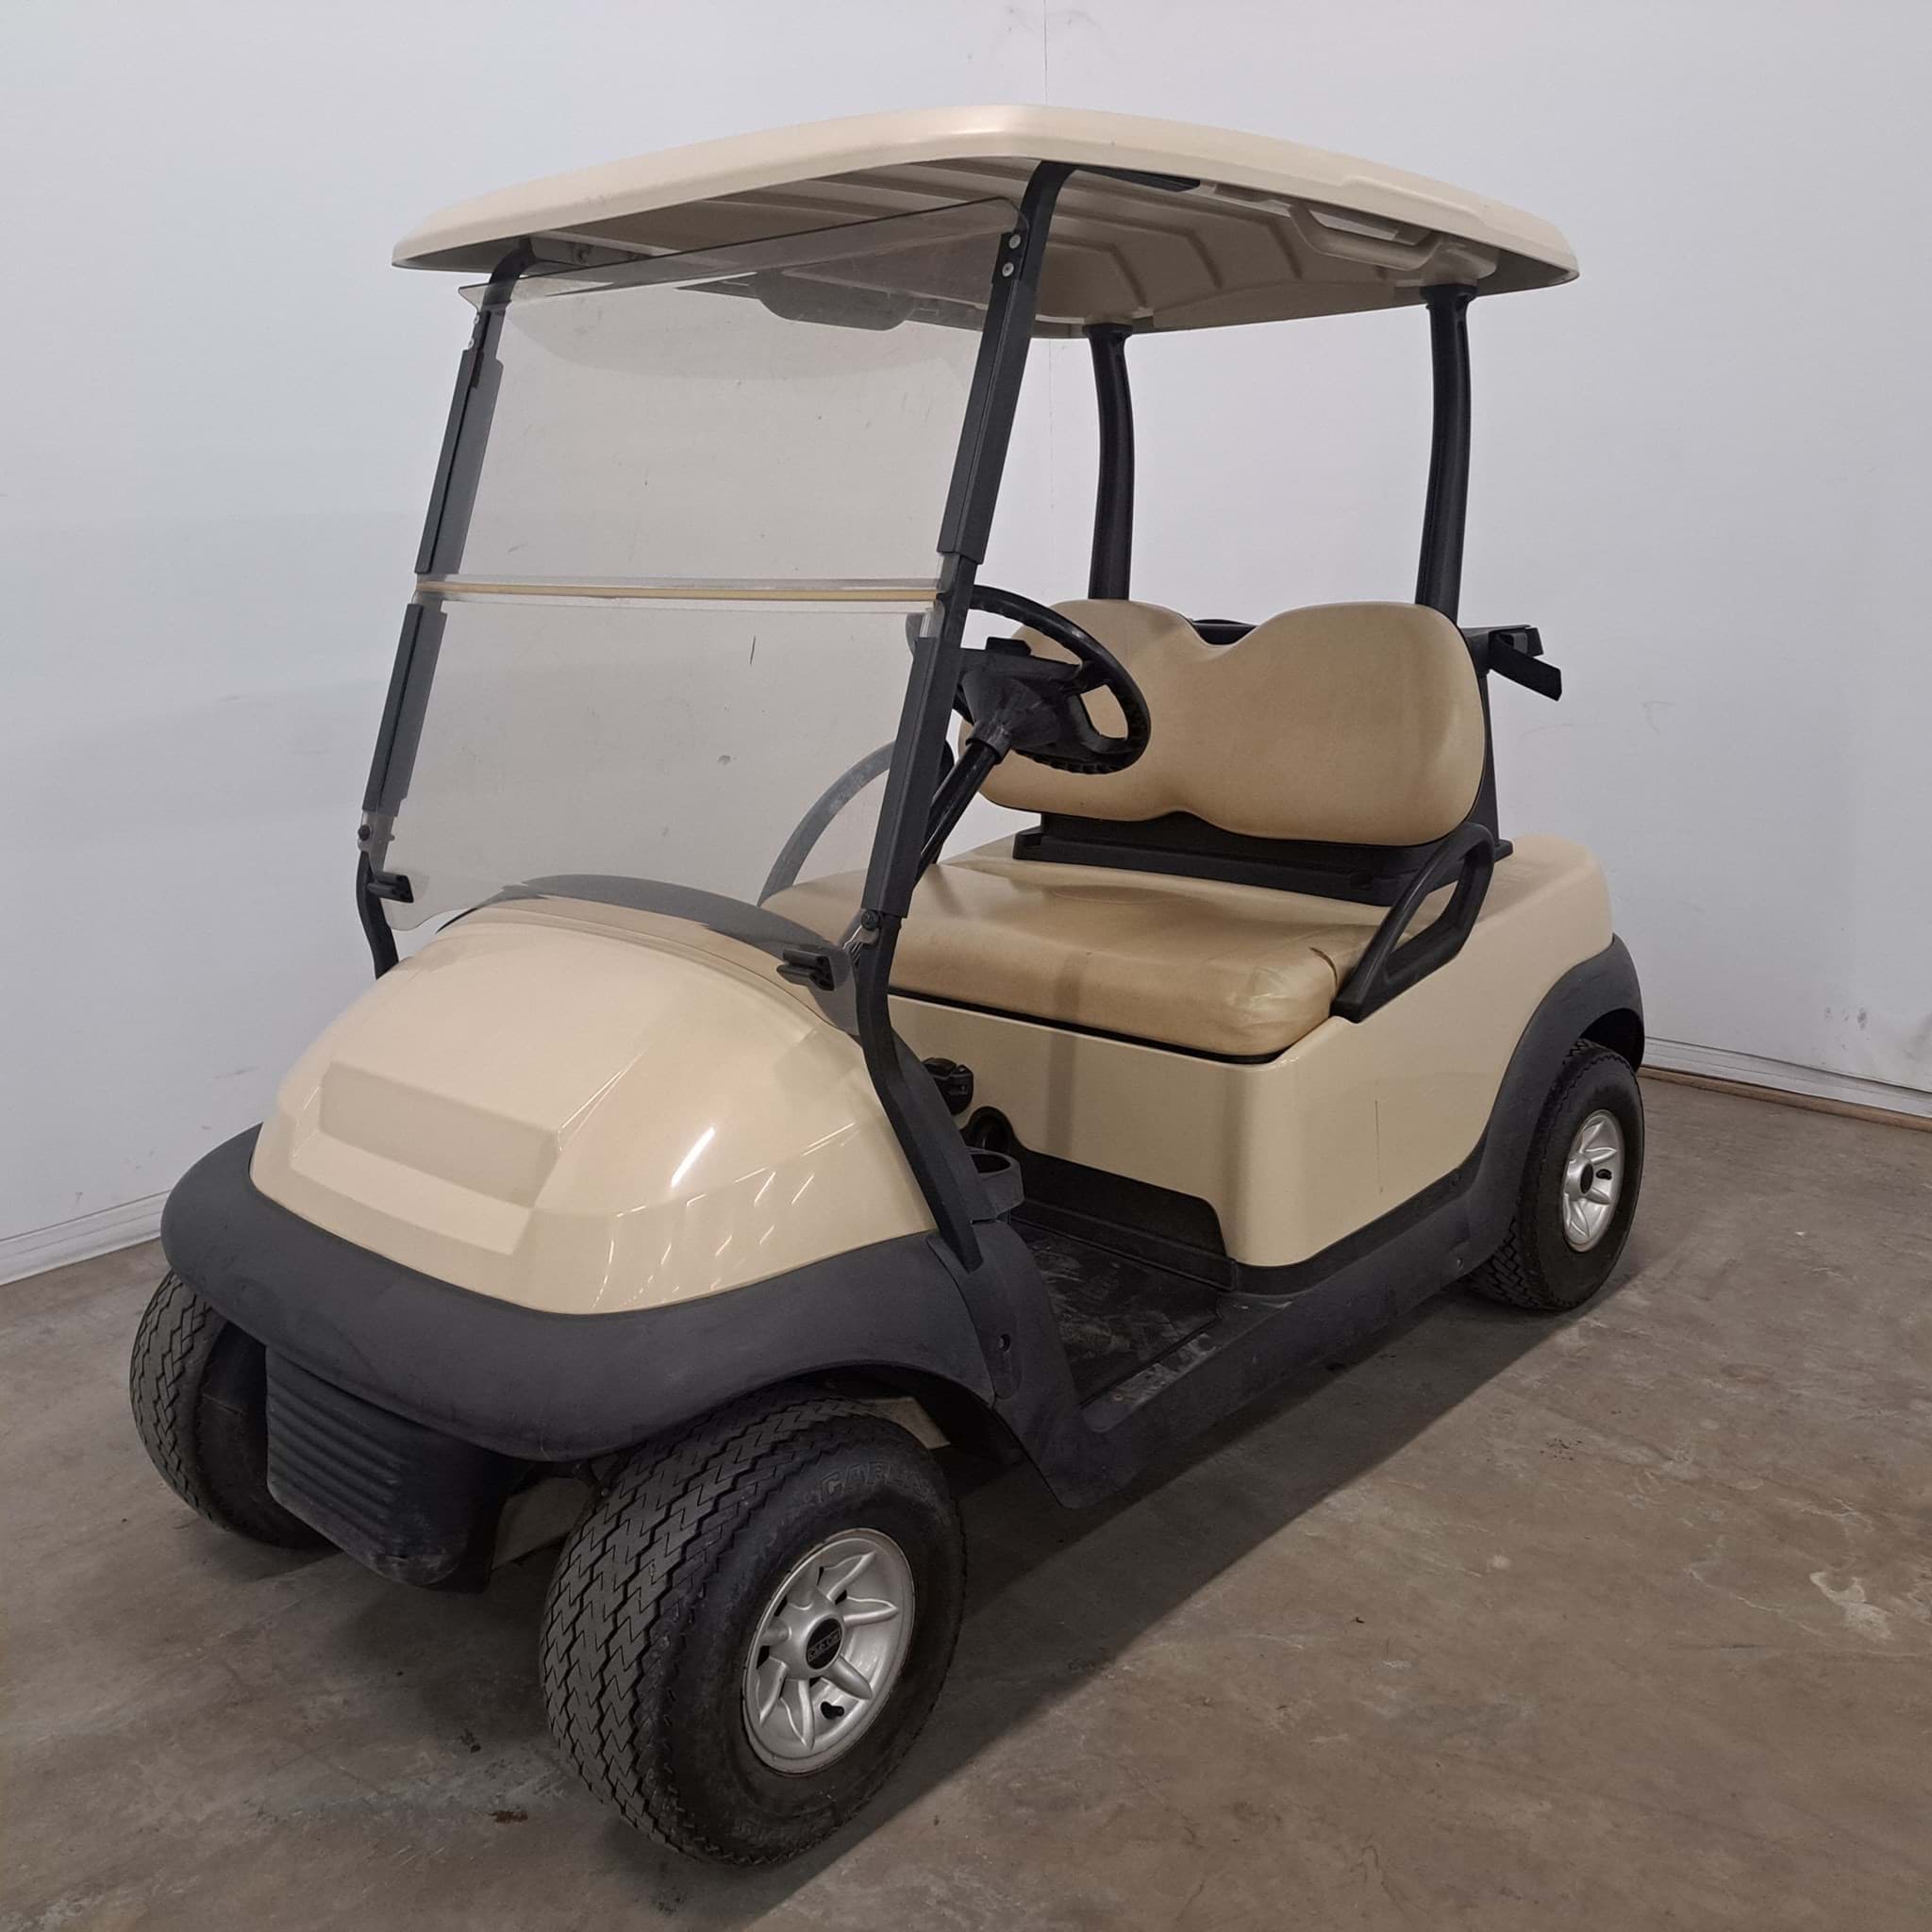 Picture of Trade - 2005 - Electric - Club Car - Precedent - 2 seater - Green